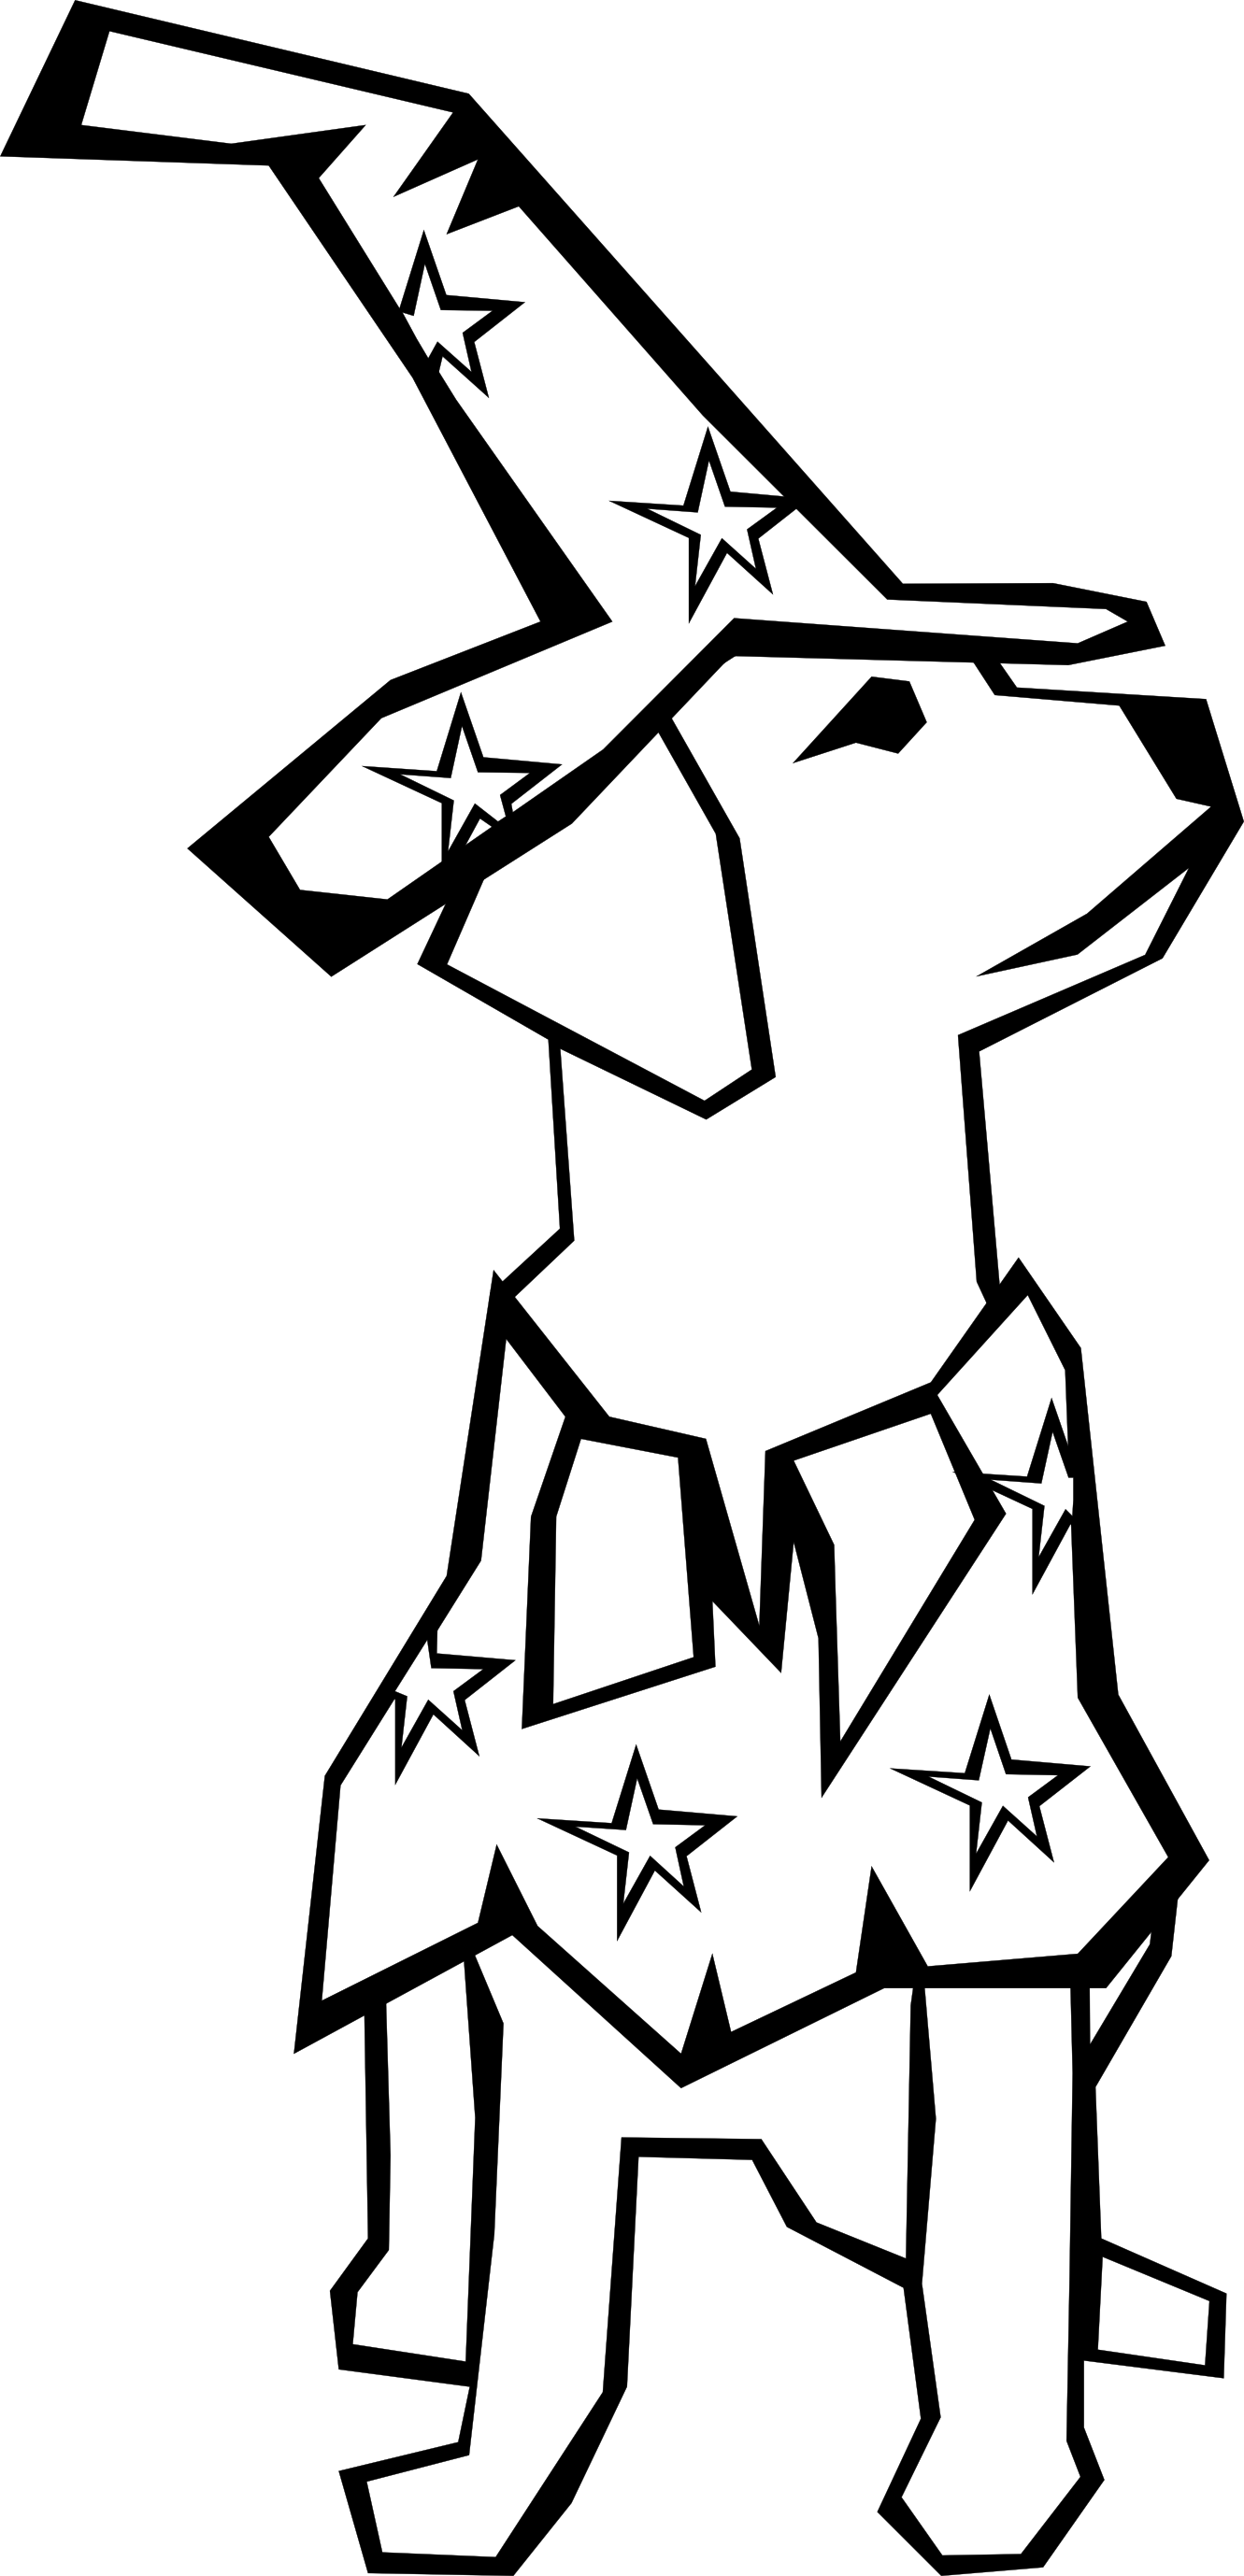 dog simple drawing 2 black white line art coloring ...